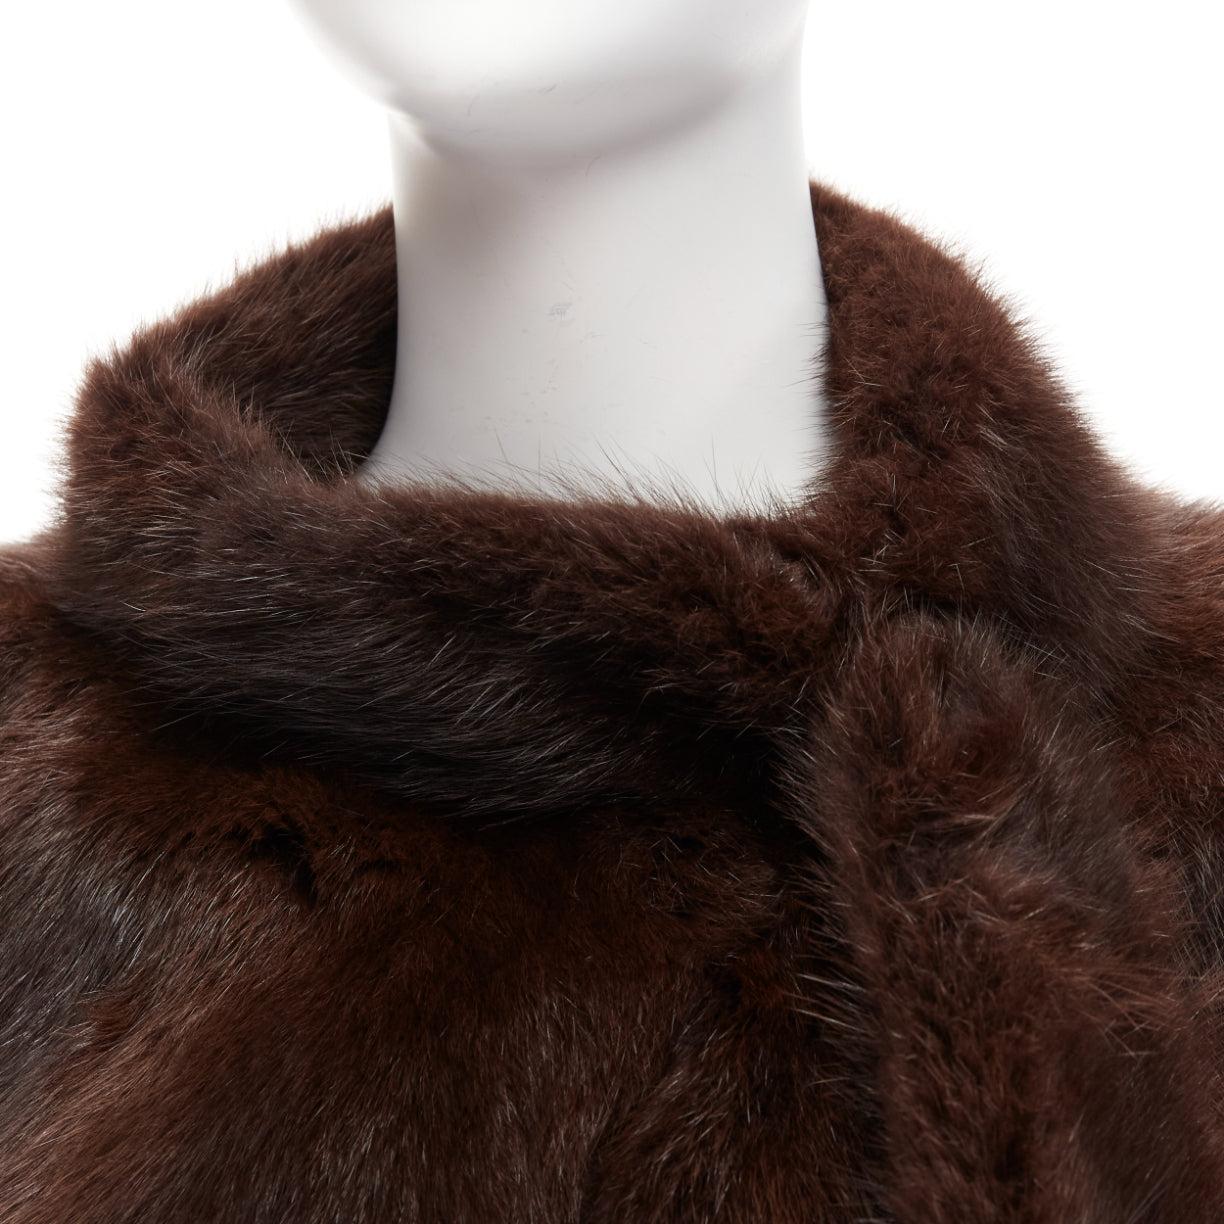 MARNI brown genuine fur logo leaf lined loop through capelet stole IT38 XS
Reference: AAWC/A01079
Brand: Marni
Material: Fur
Color: Brown
Pattern: Solid
Closure: Loop Through
Lining: Brown Cupro
Extra Details: Loop through neck details.
Made in: